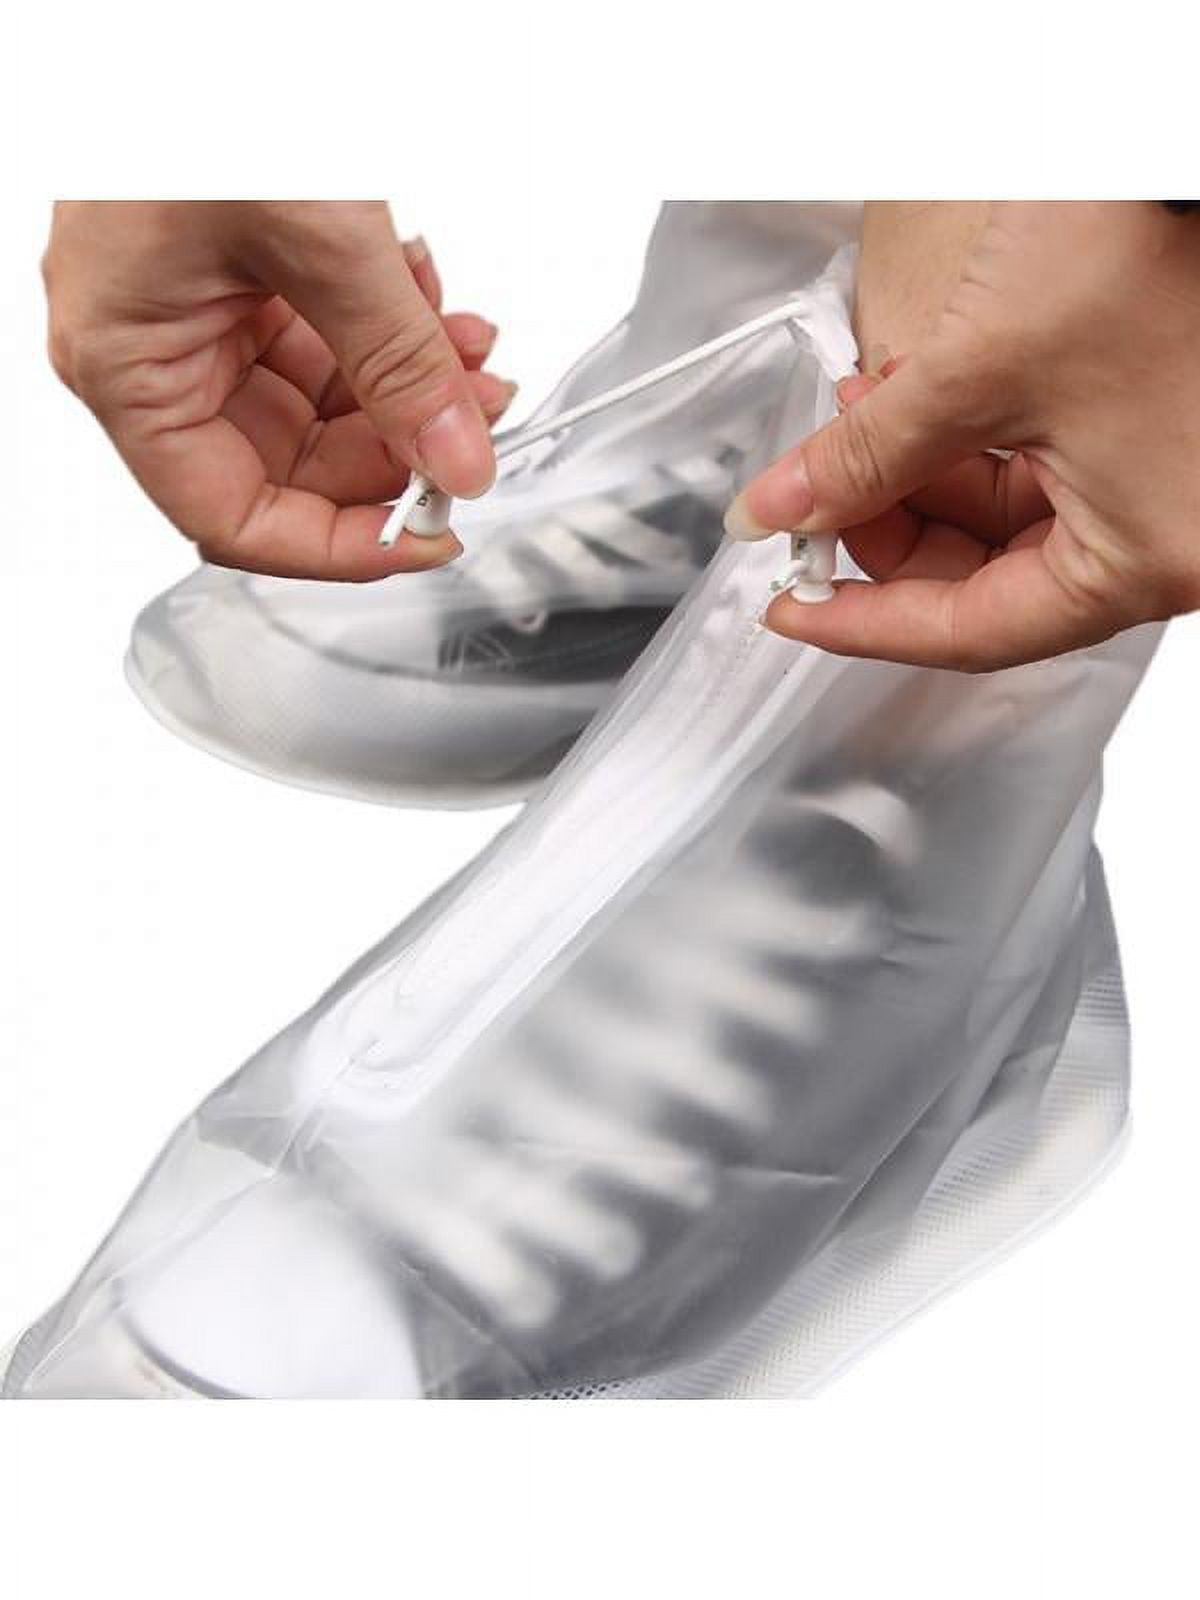 Rain Snow Shoe Covers Reusable Waterproof shoes Overshoes Boot Protector - image 4 of 6